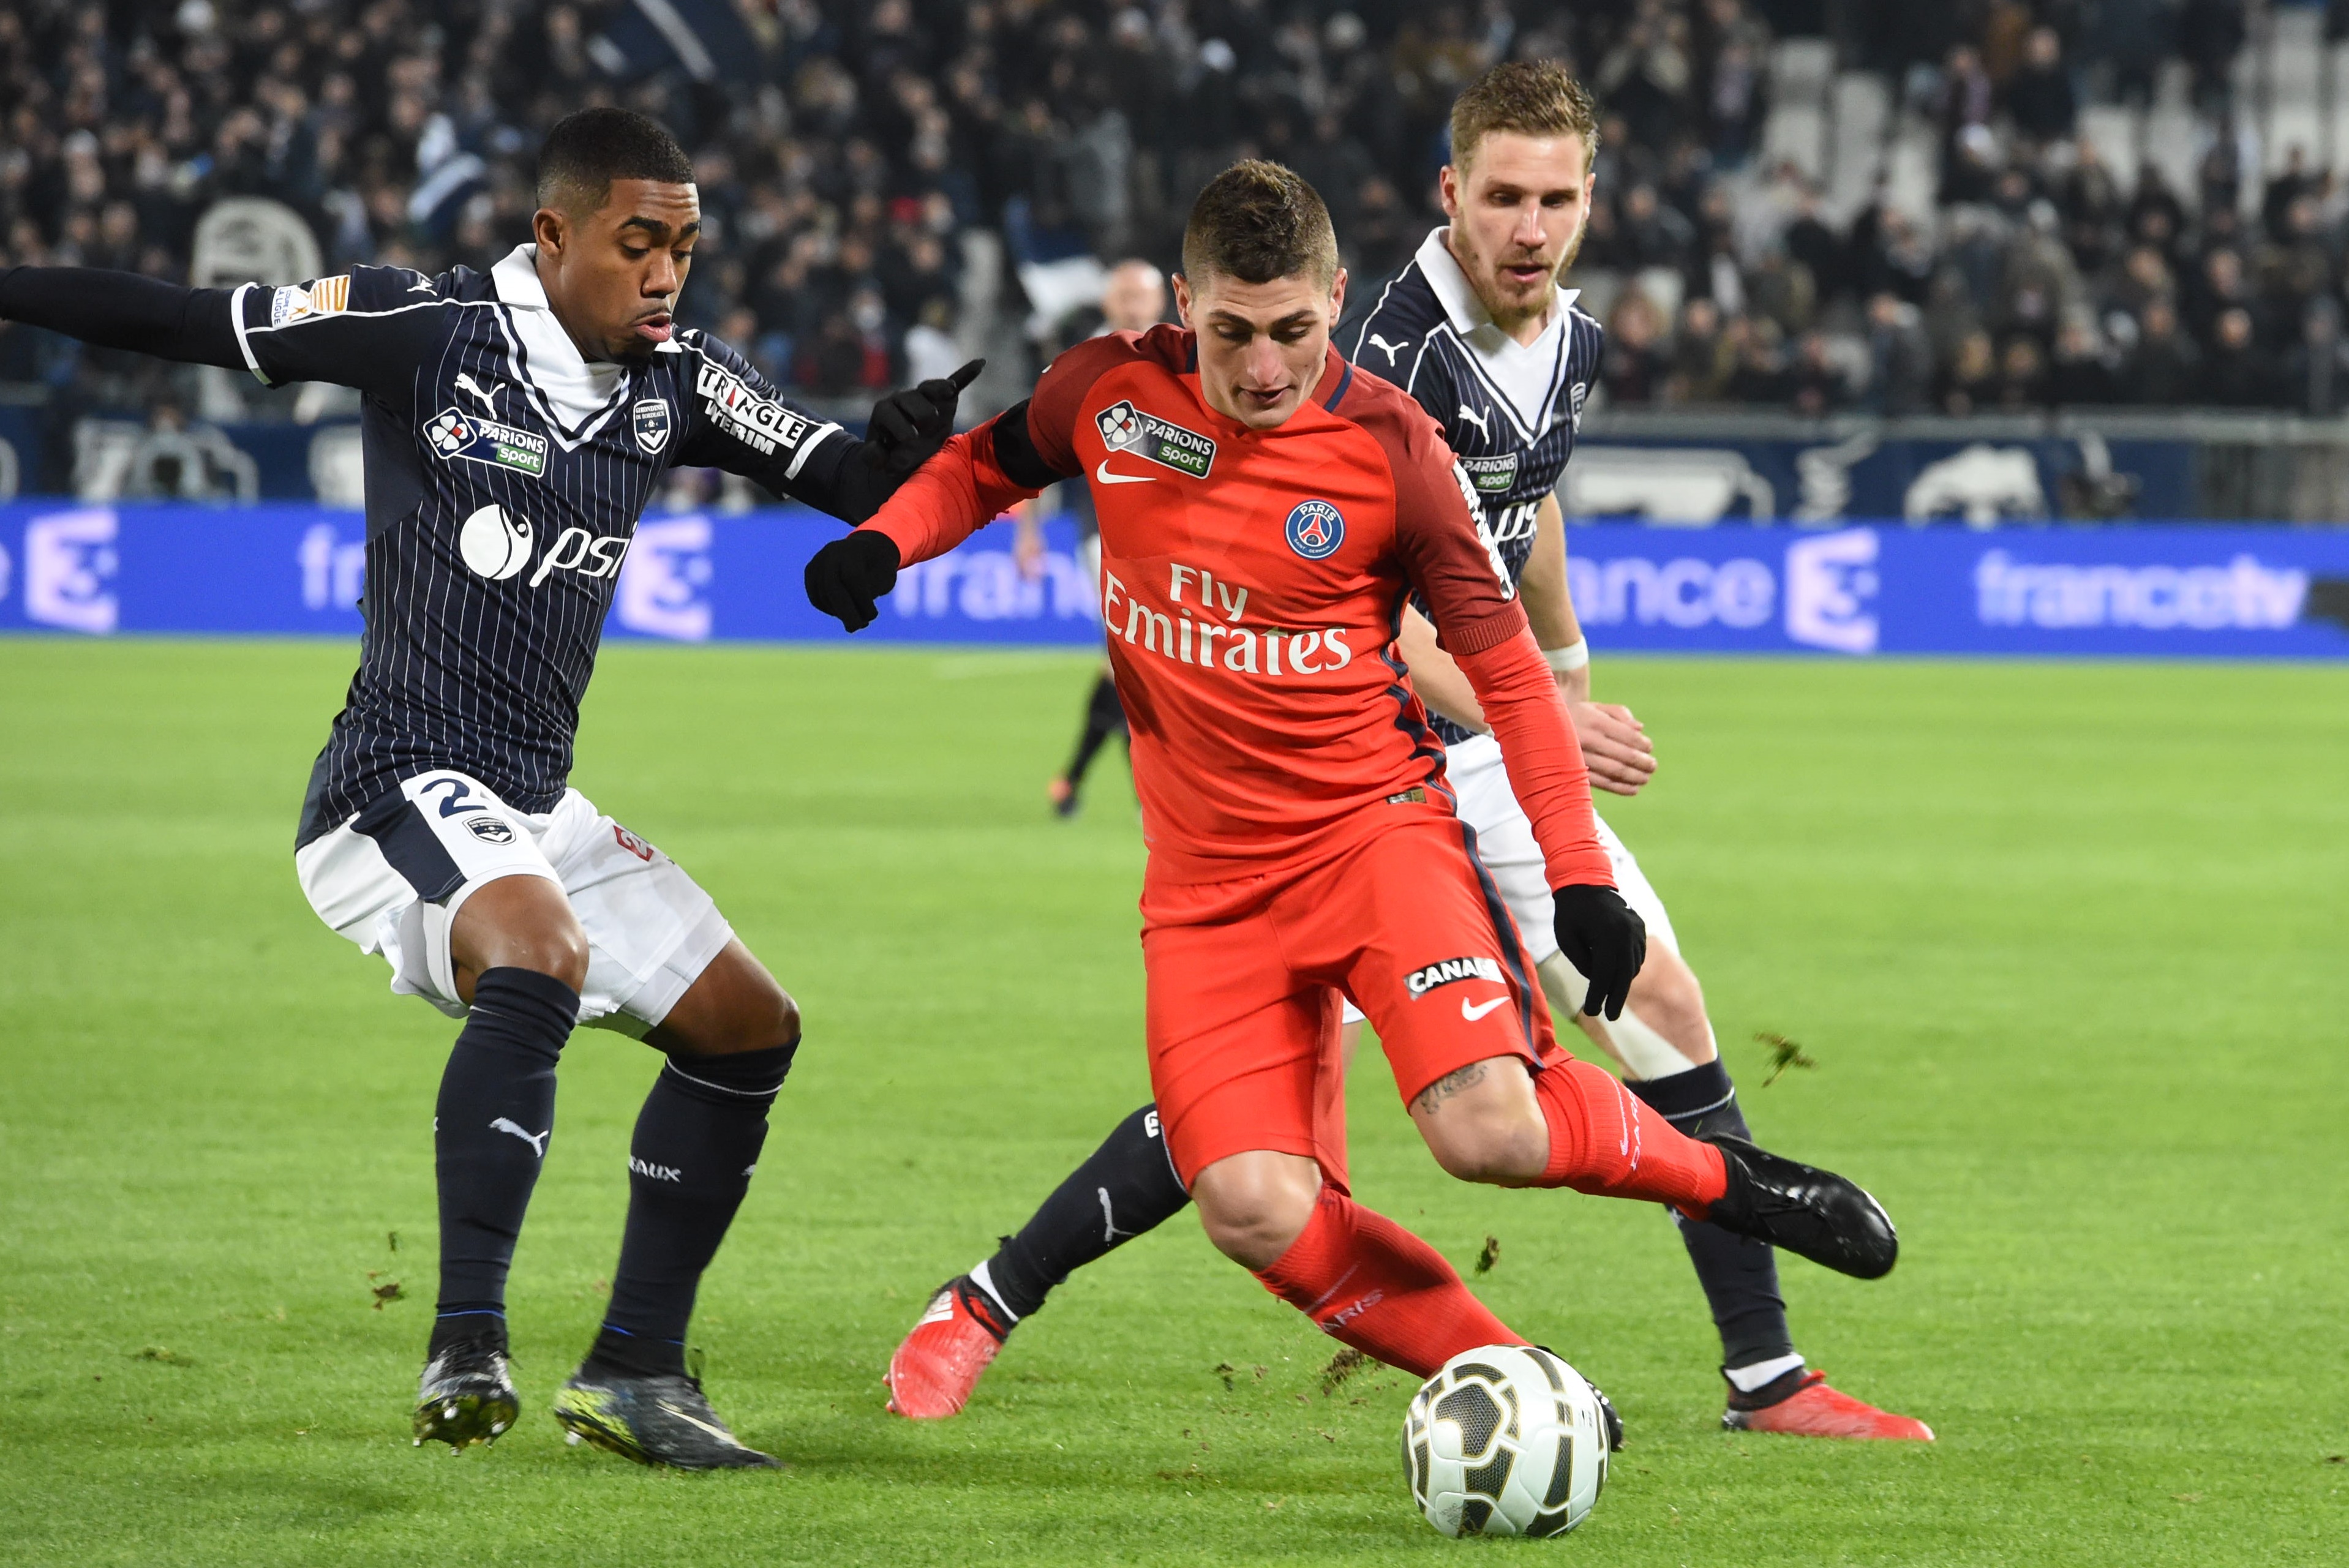 Bordeaux' Brazilian forward Malcolm (L) vies with Paris' Italian midfielder Marco Verratti (R) during the League Cup football match between Bordeaux and Paris Saint-Germain (PSG) on January 24, 2017 at the Matmut Stadium in Bordeaux.   / AFP / MEHDI FEDOUACH        (Photo credit should read MEHDI FEDOUACH/AFP/Getty Images)